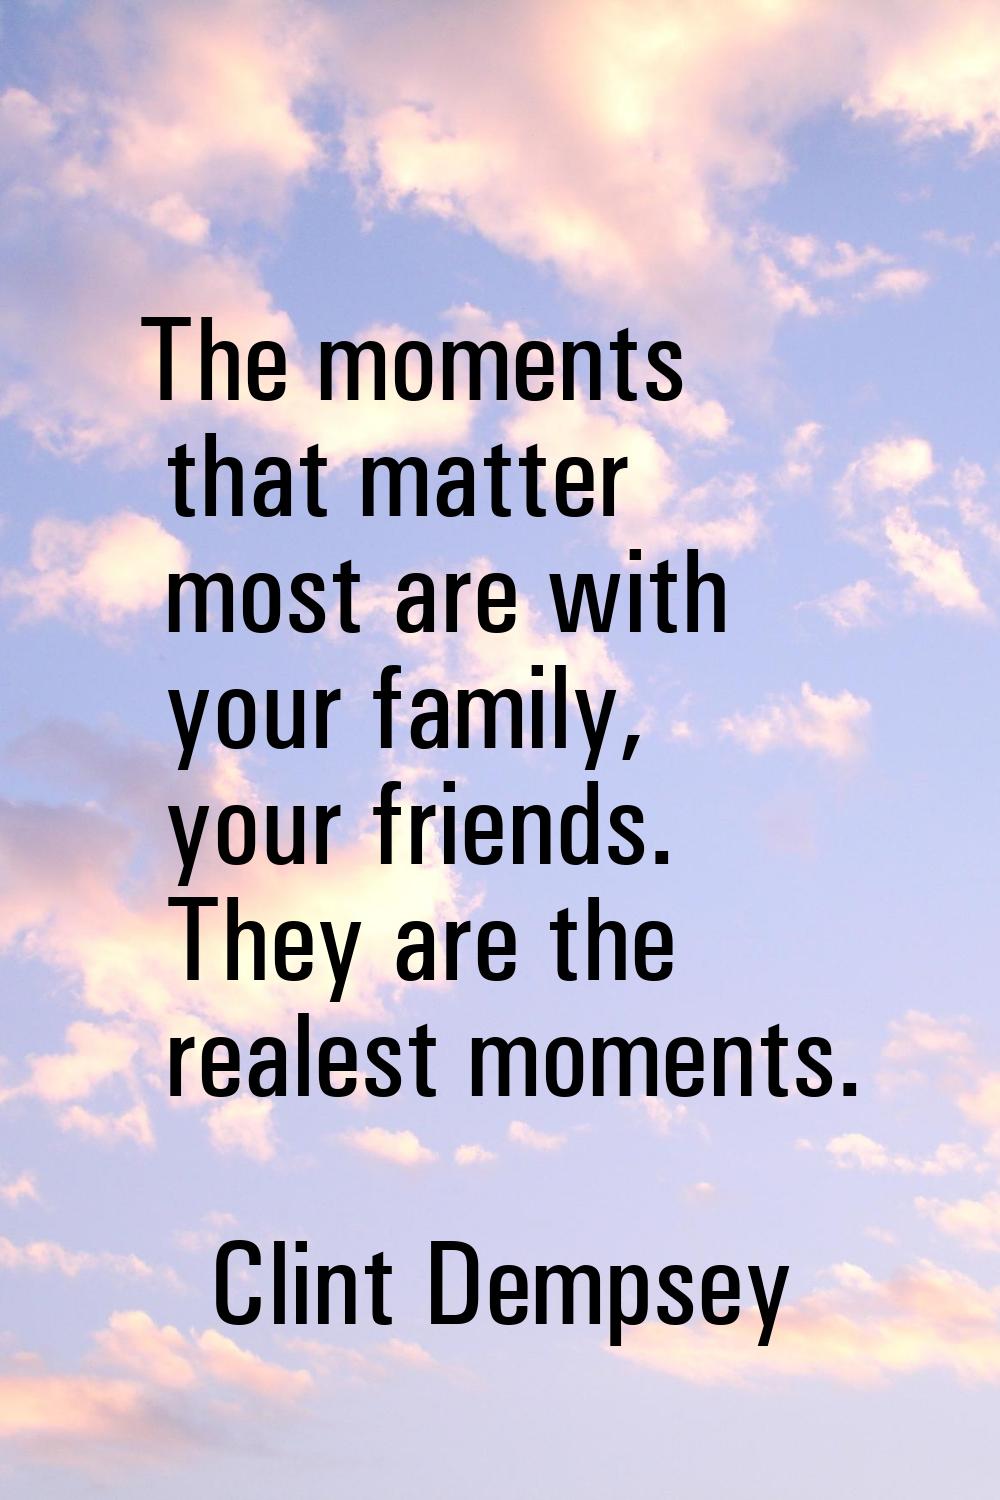 The moments that matter most are with your family, your friends. They are the realest moments.